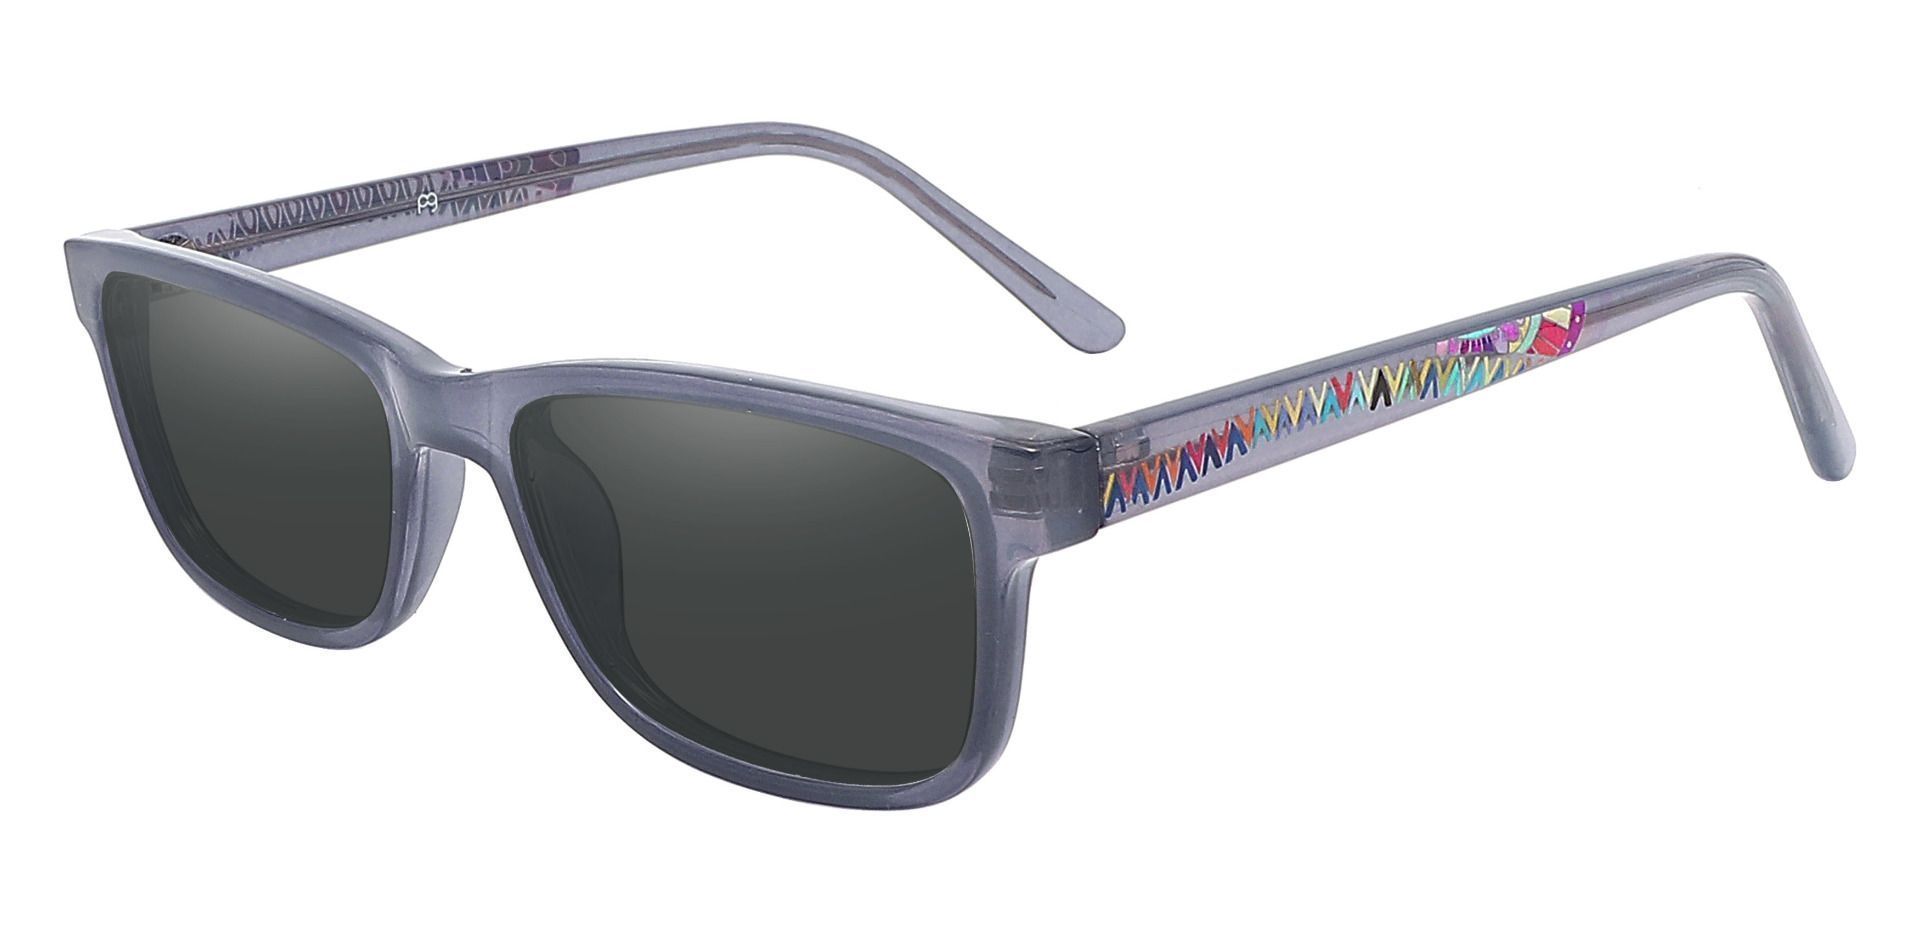 Cory Rectangle Non-Rx Sunglasses - Blue Frame With Gray Lenses